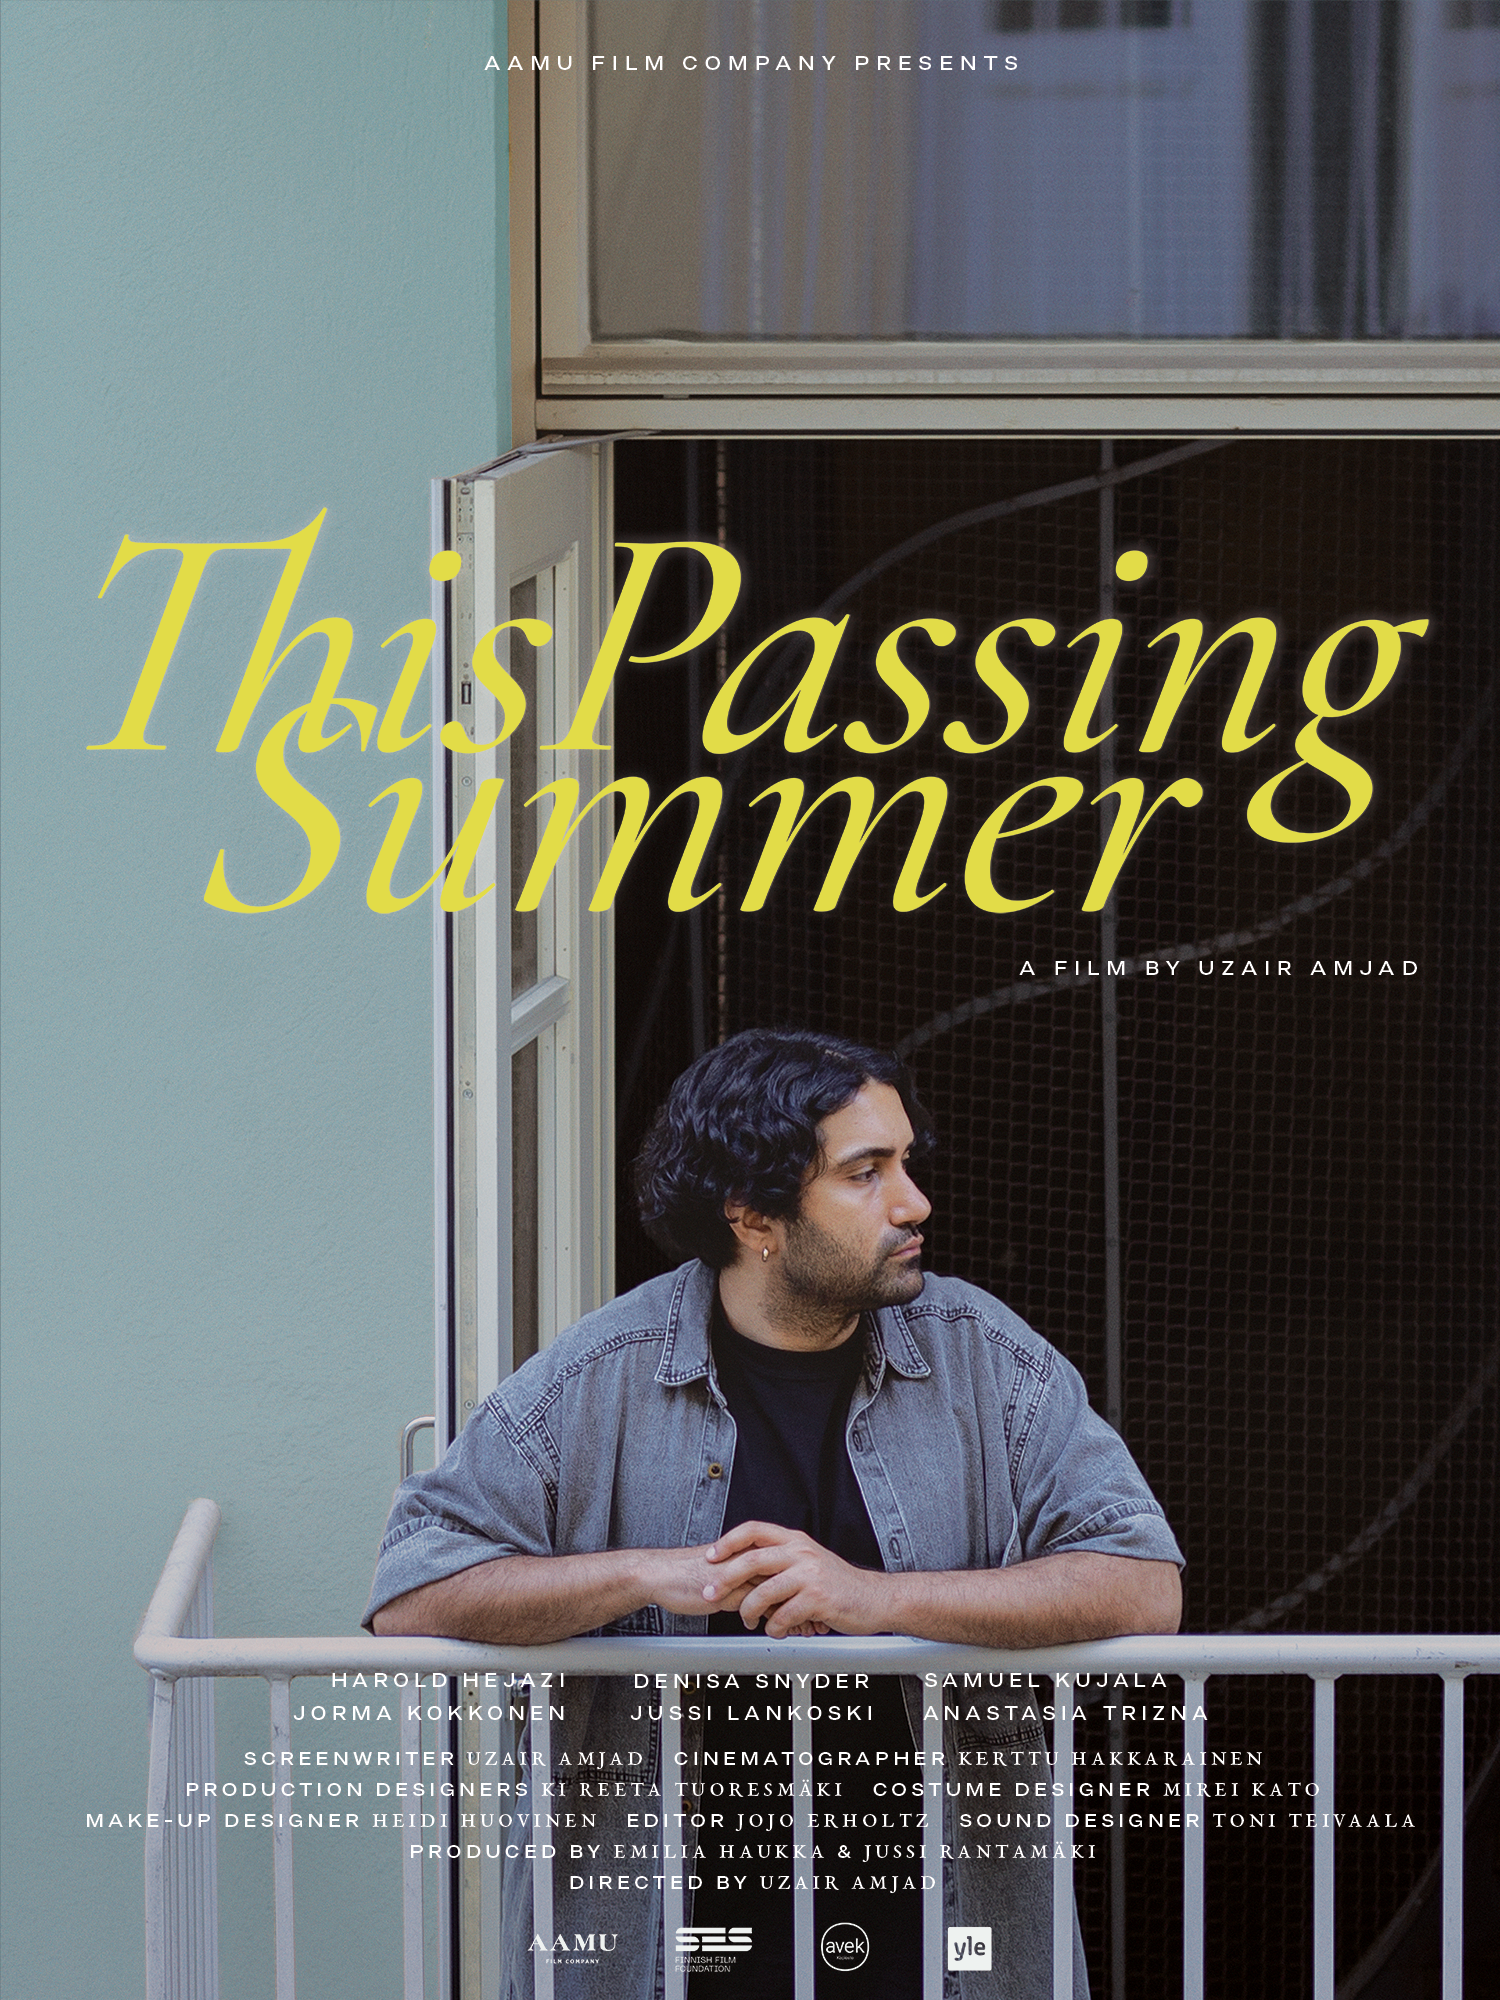 This Passing Summer